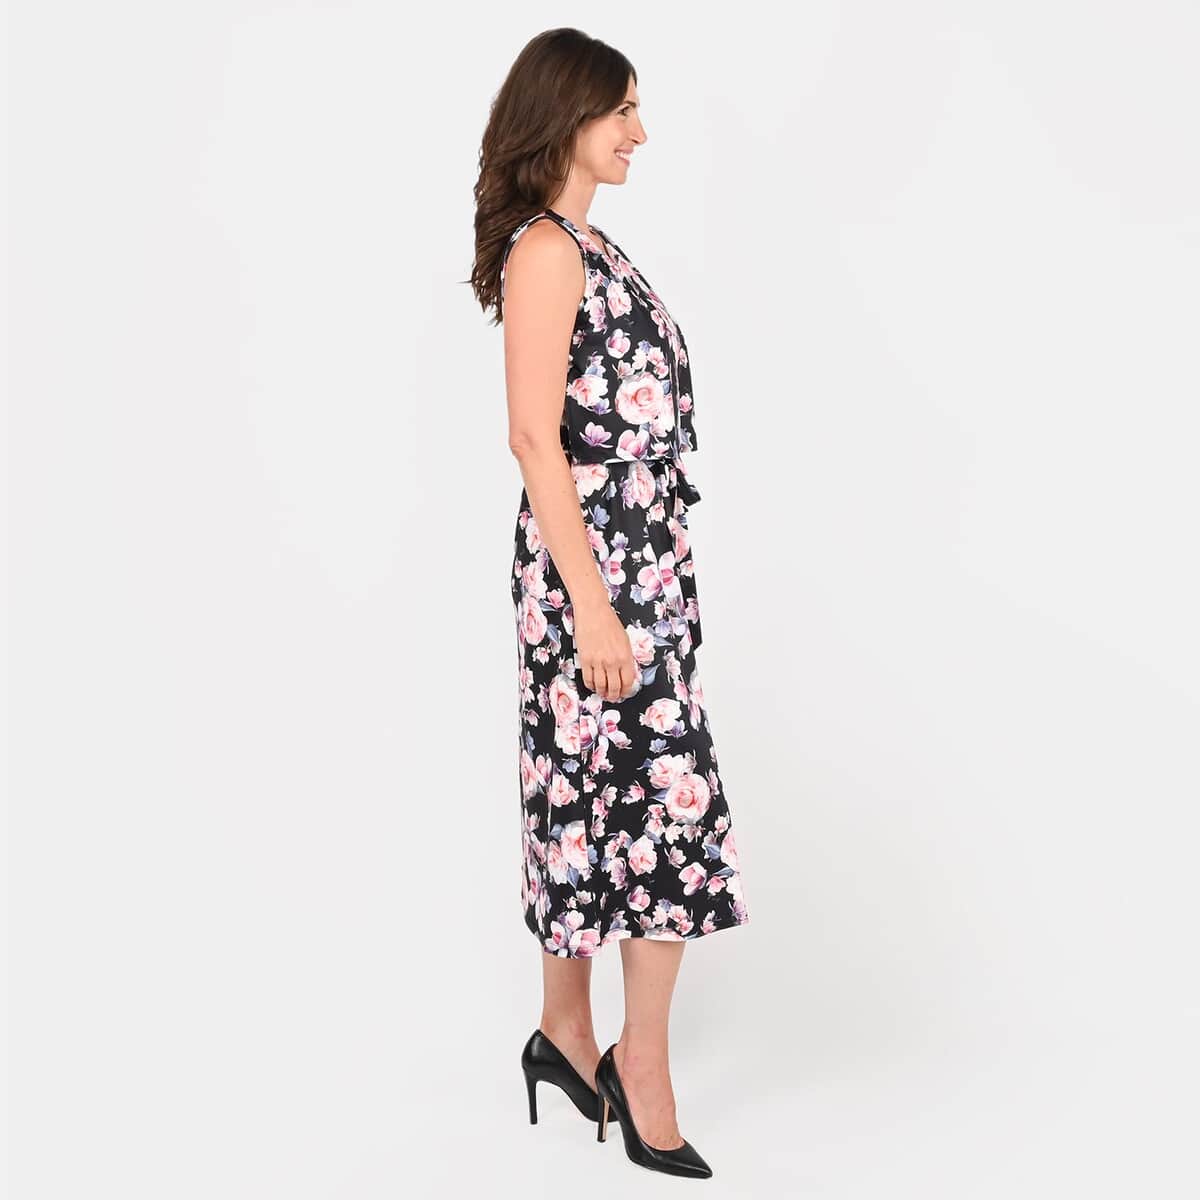 Tamsy Black Floral Sleeveless Dress with Waist Tie - L image number 2